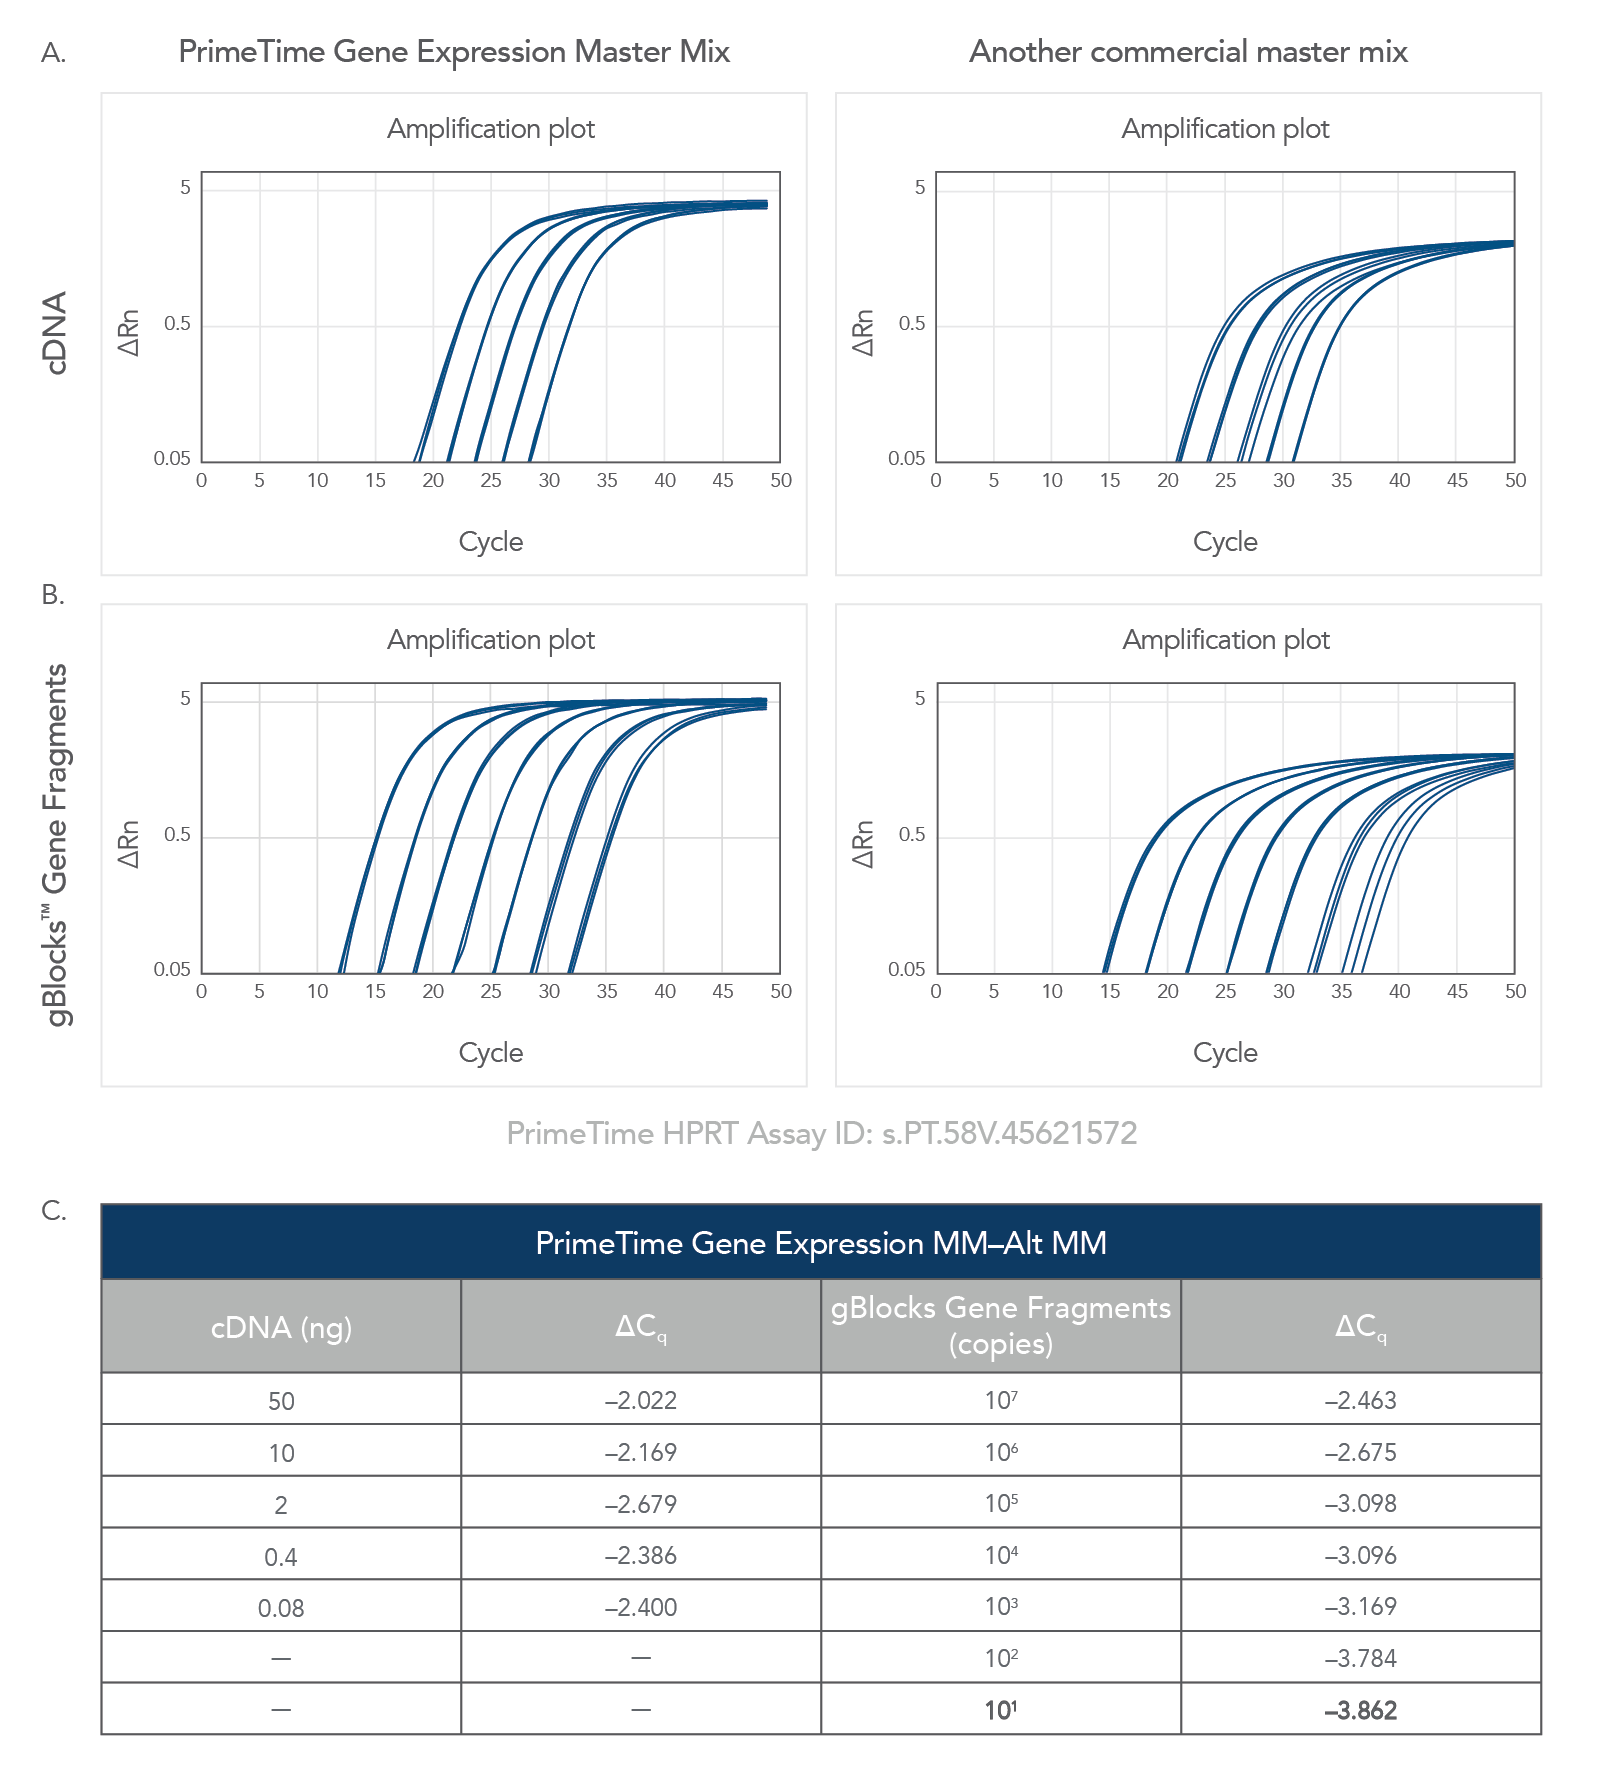 Results from a qPCR reaction using the PrimeTime Gene Expression Master Mix. dCq values for the PrimeTime Gene Expression Master Mix Alternative master mixes of cDNA and gBlocks Fragments.